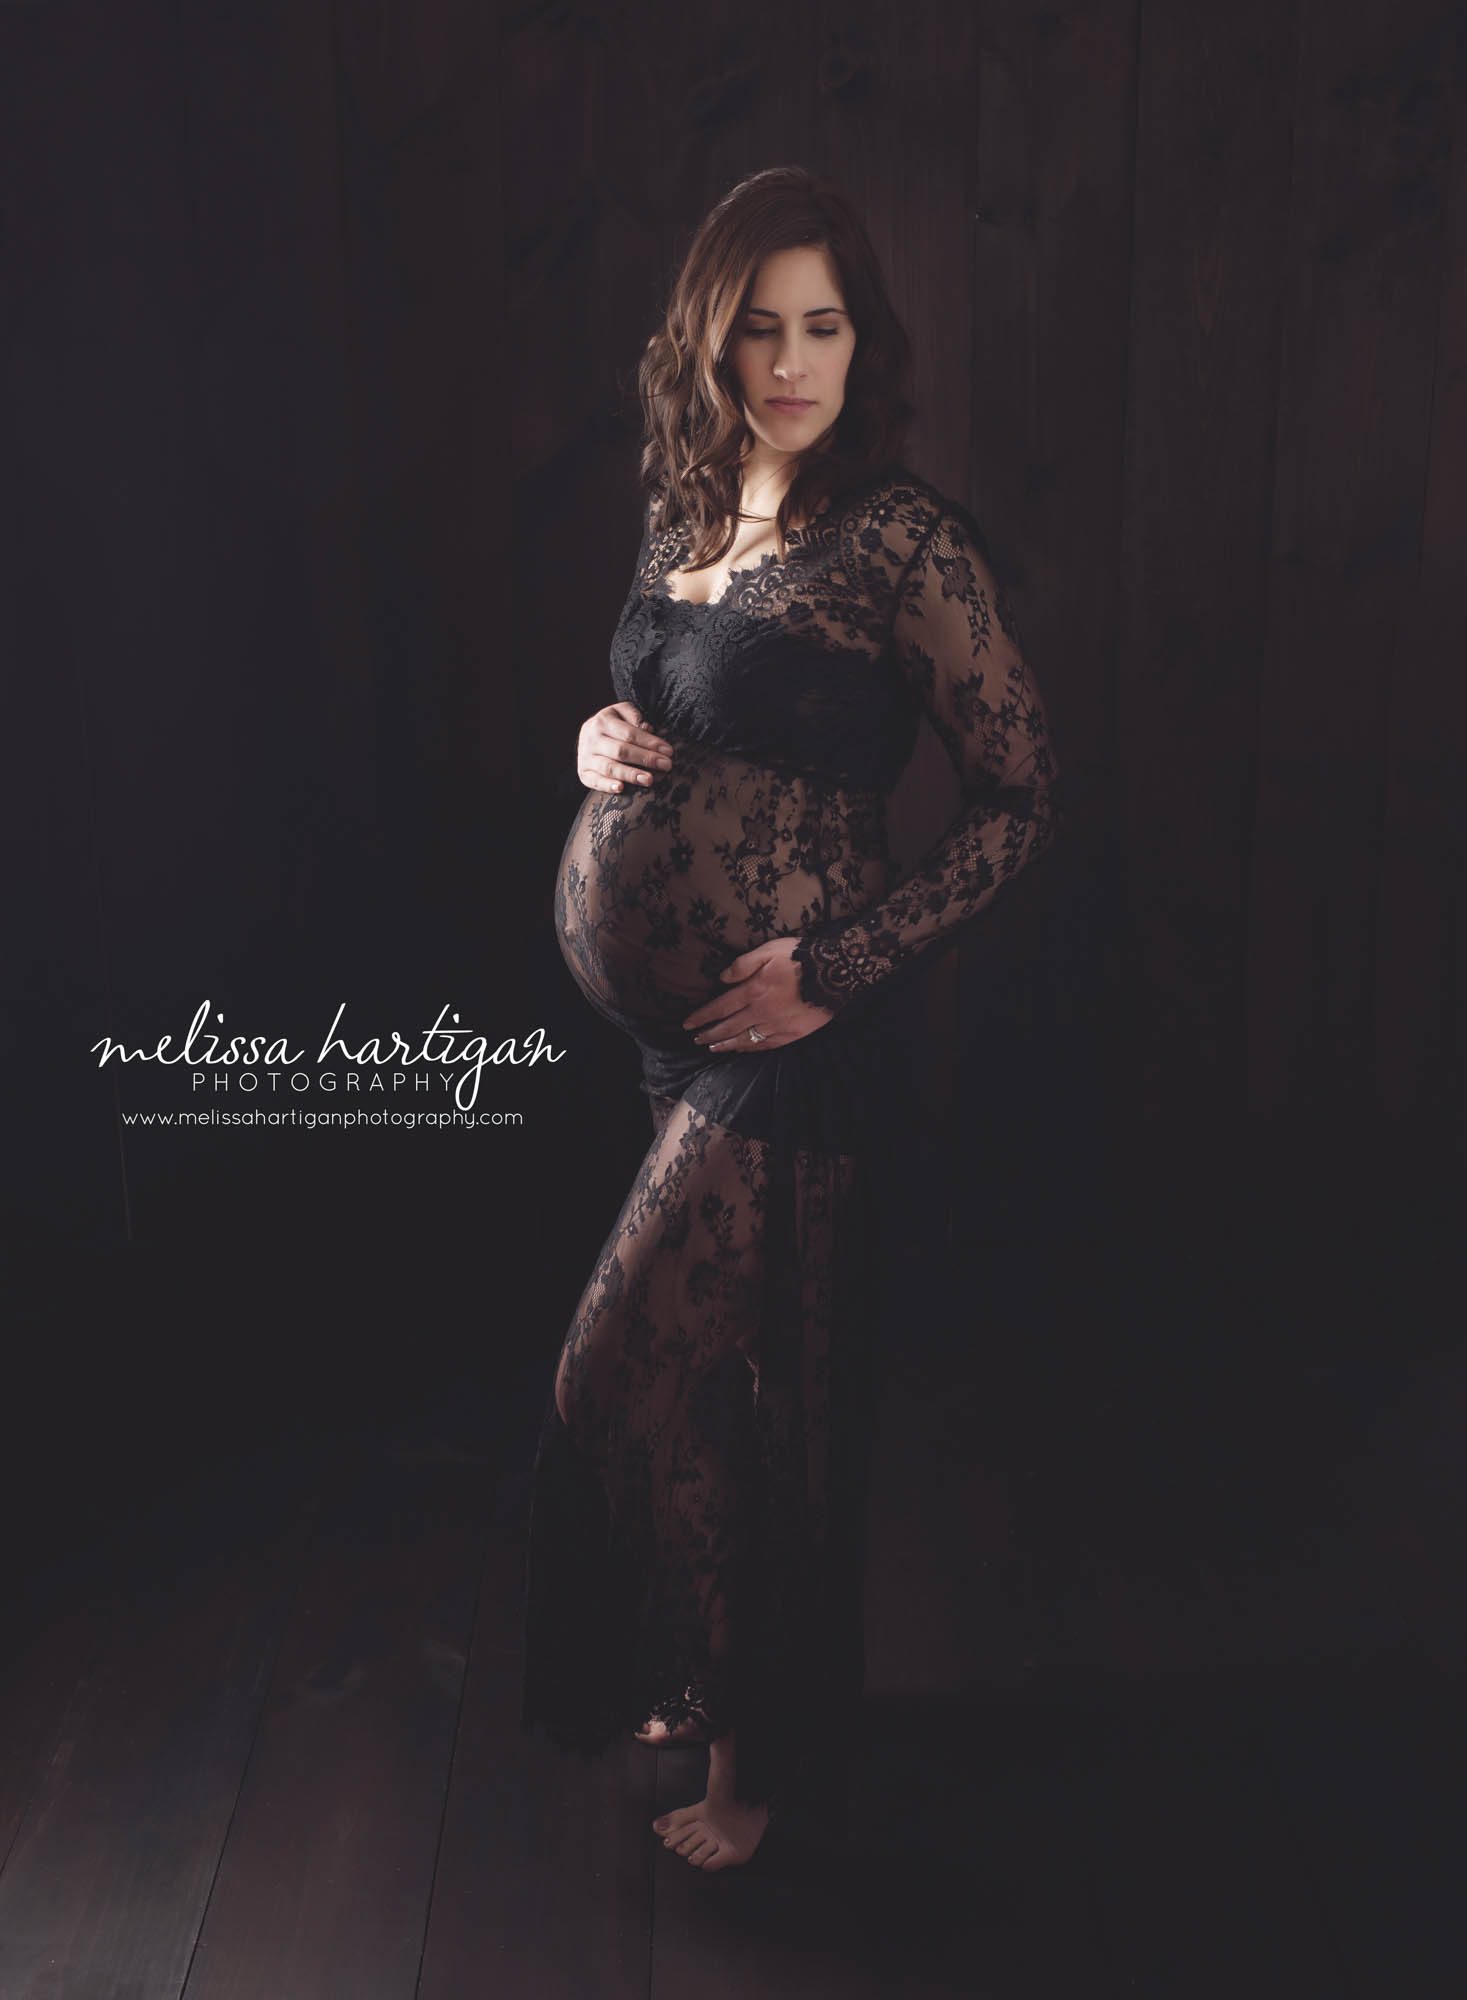 Melissa Hartigan Photography Connecticut Best Maternity Photographer in CT Coventry Ct Middlefield CT baby Fairfield county Newborn and maternity CT photographer Maternity photographer Mommy-to-be indoor session wearing black lace dress standing in front of dark wooden backdrop